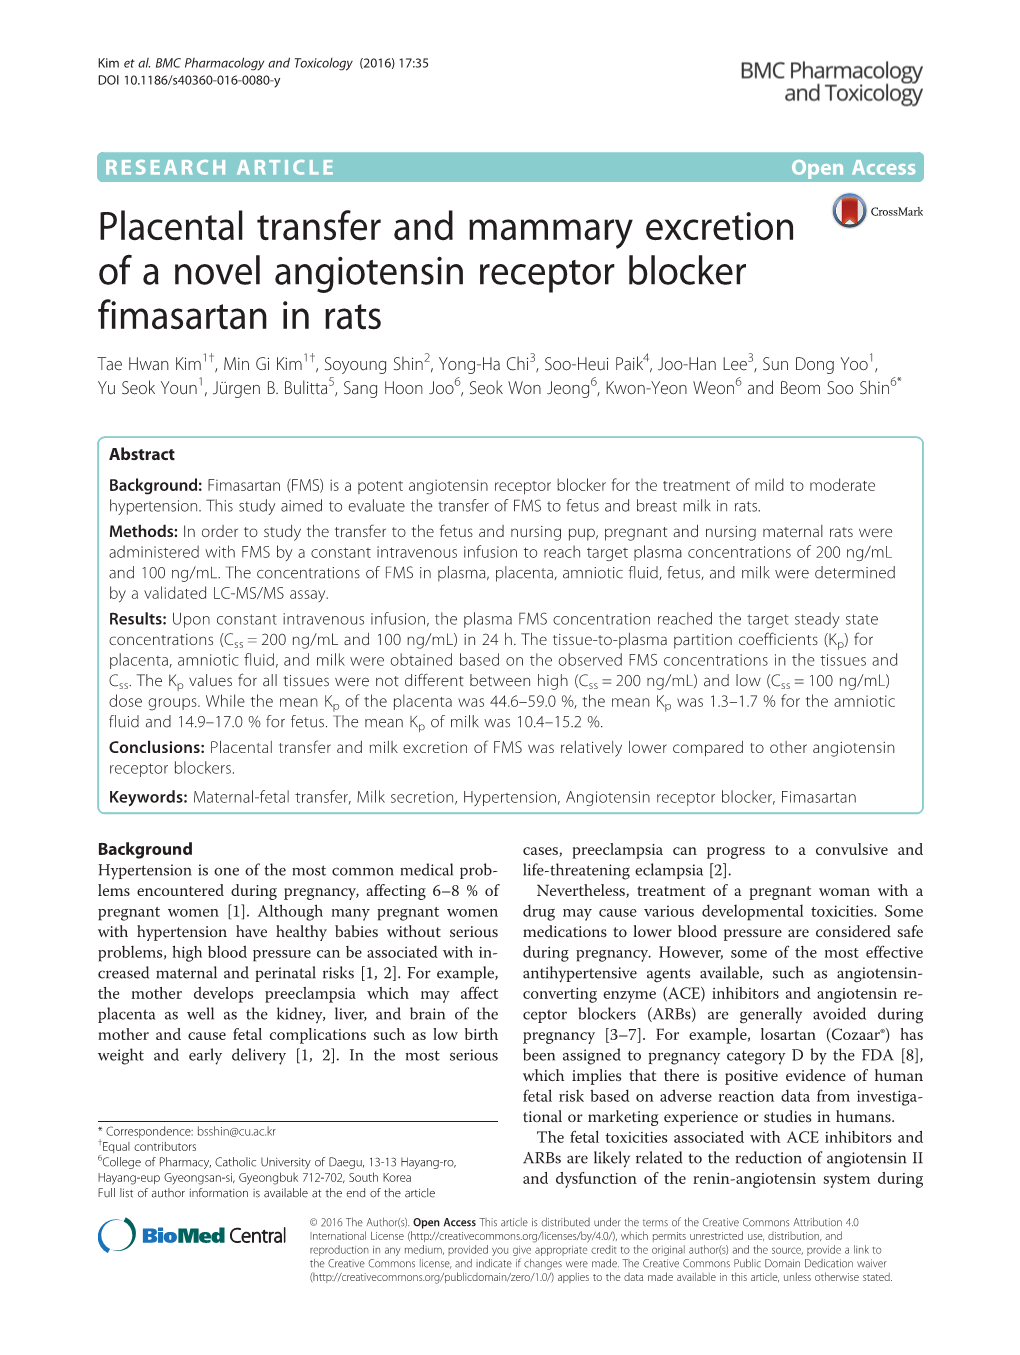 Placental Transfer and Mammary Excretion of a Novel Angiotensin